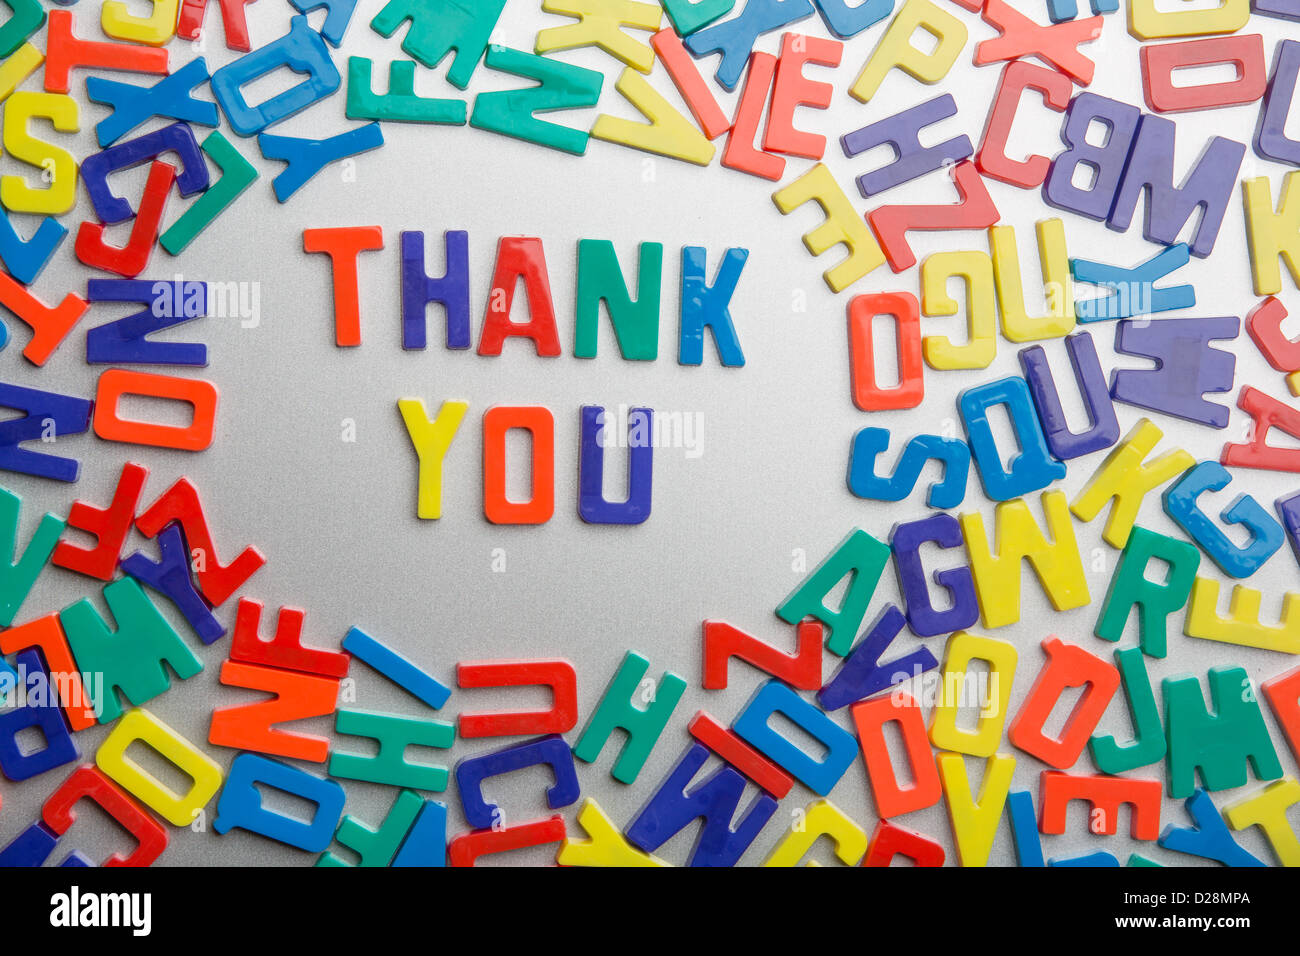 'Thank You' - Refrigerator magnets spell a message out of a jumble of letters Stock Photo